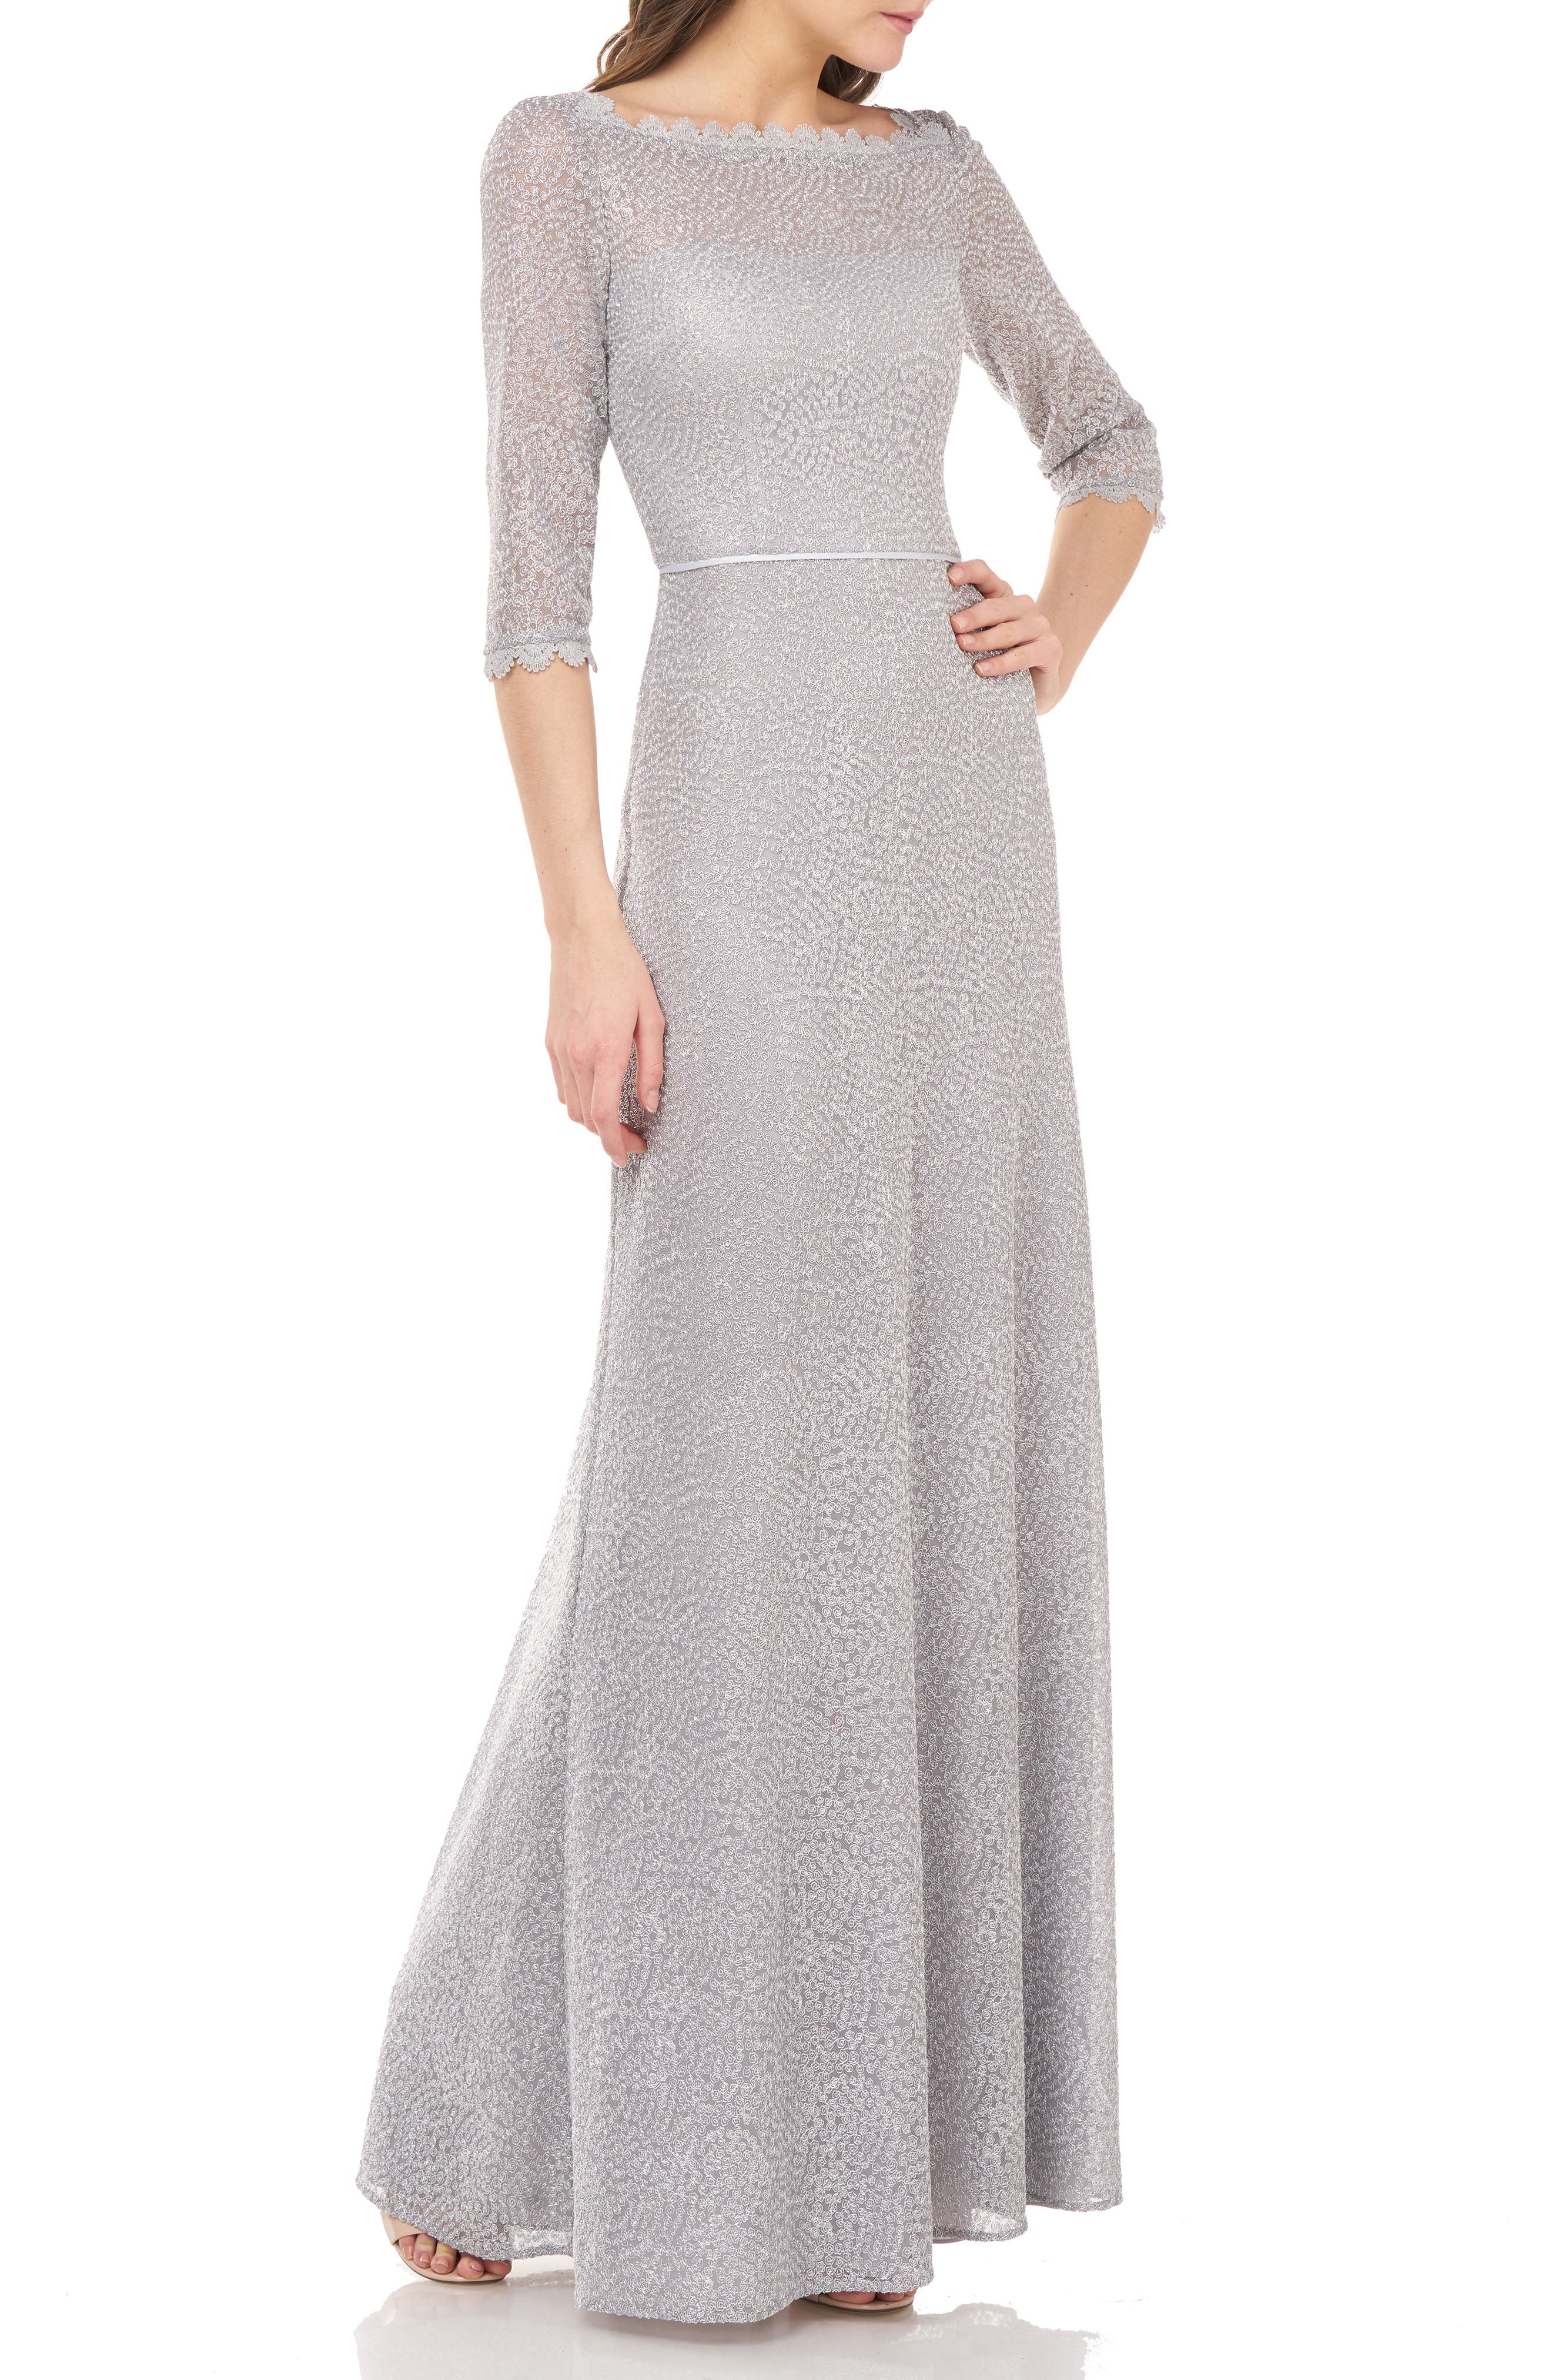 JS COLLECTIONS METALLIC LACE A-LINE GOWN,628292170050